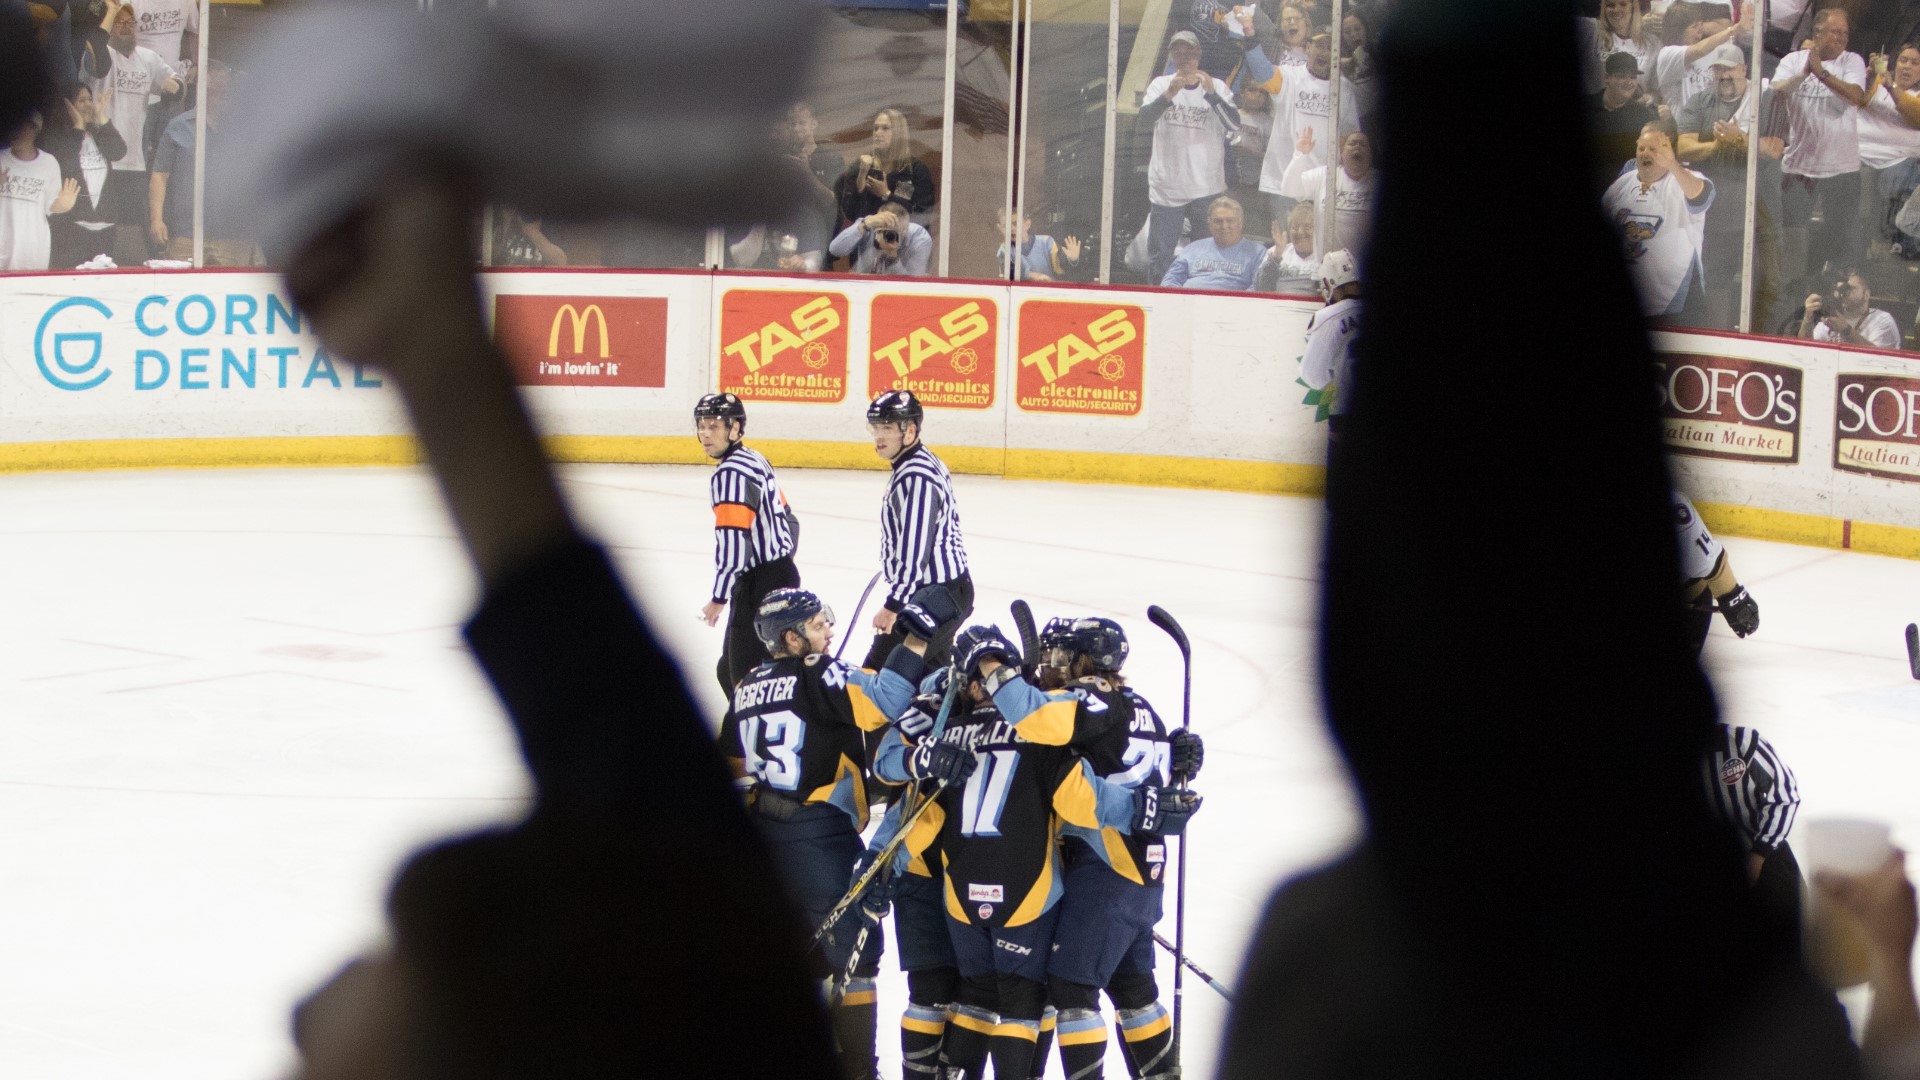 The Toledo Walleye will be among the teams that will begin their season in January and play a shortened, 62-game season.